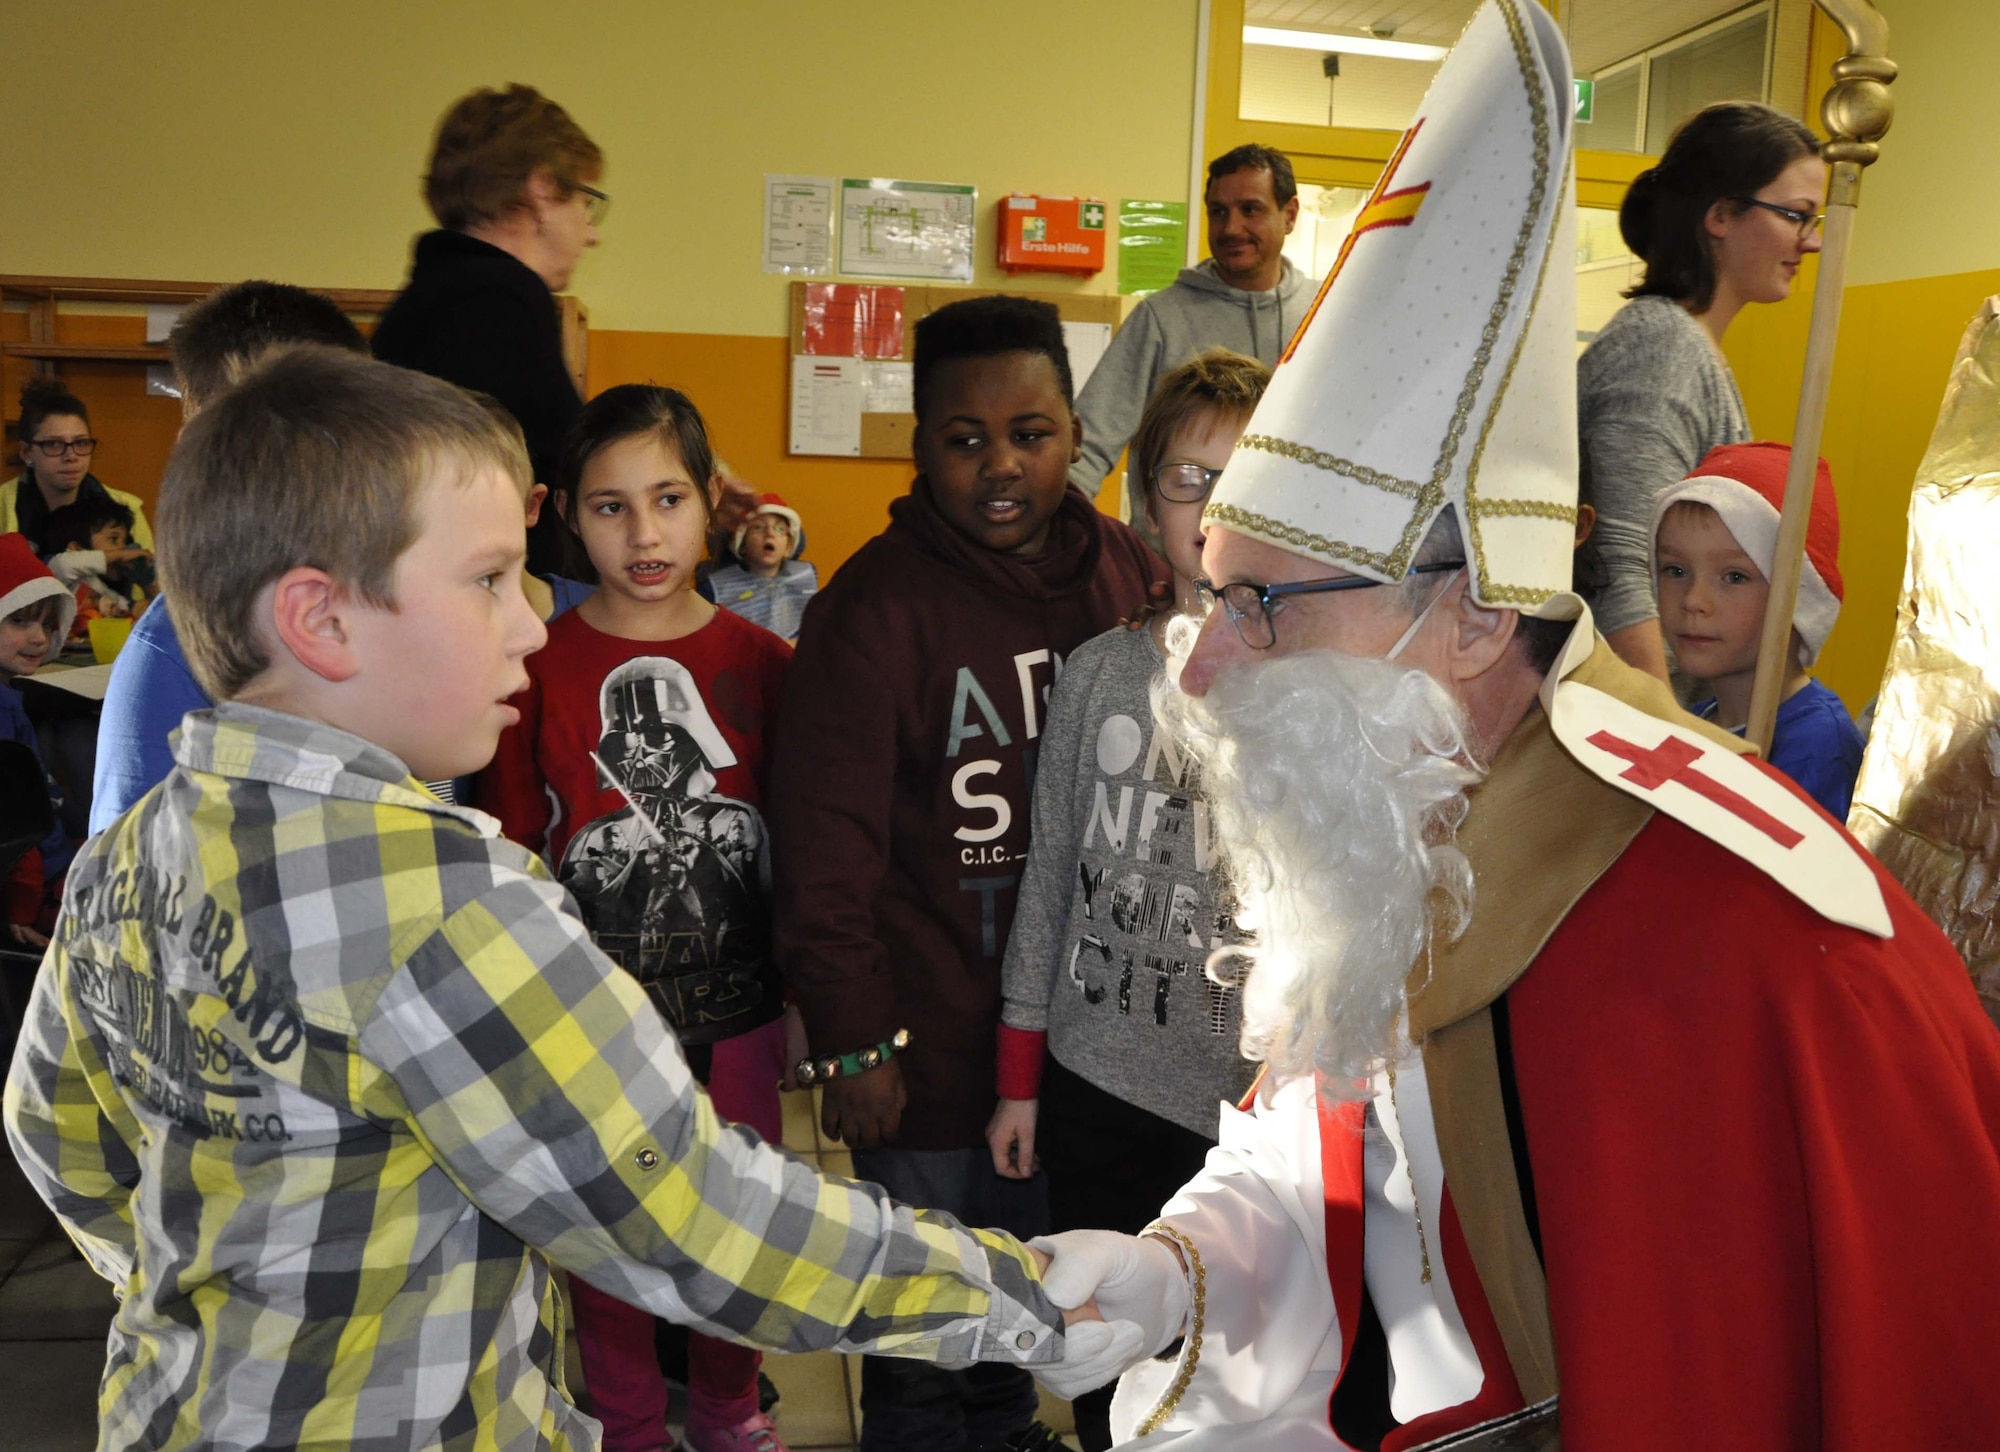 A school student of the Bitburg Saint Martin school shakes hands with Sankt Nicholas during the school's annual Saint Nicholas celebration, Dec. 5 in Bitburg. The event included a visit by Saint Nicholas, dances and singing performances by the children, as well as a gift presentation by the 52nd Fighter Wing. The celebration was attended by Saint Martin school officials, parents, 52nd Fighter Wing leadership spouses, as well as Airmen and civilians from the wing, who provided gifts to students and kindergarten children. In the summer, Spangdahlem Sabers invited the Saint Martin school to Special Children’s Day at Spangdahlem AB, where they played games and spent a fun-filled time together. (U.S. Air Force photo by Iris Reiff)